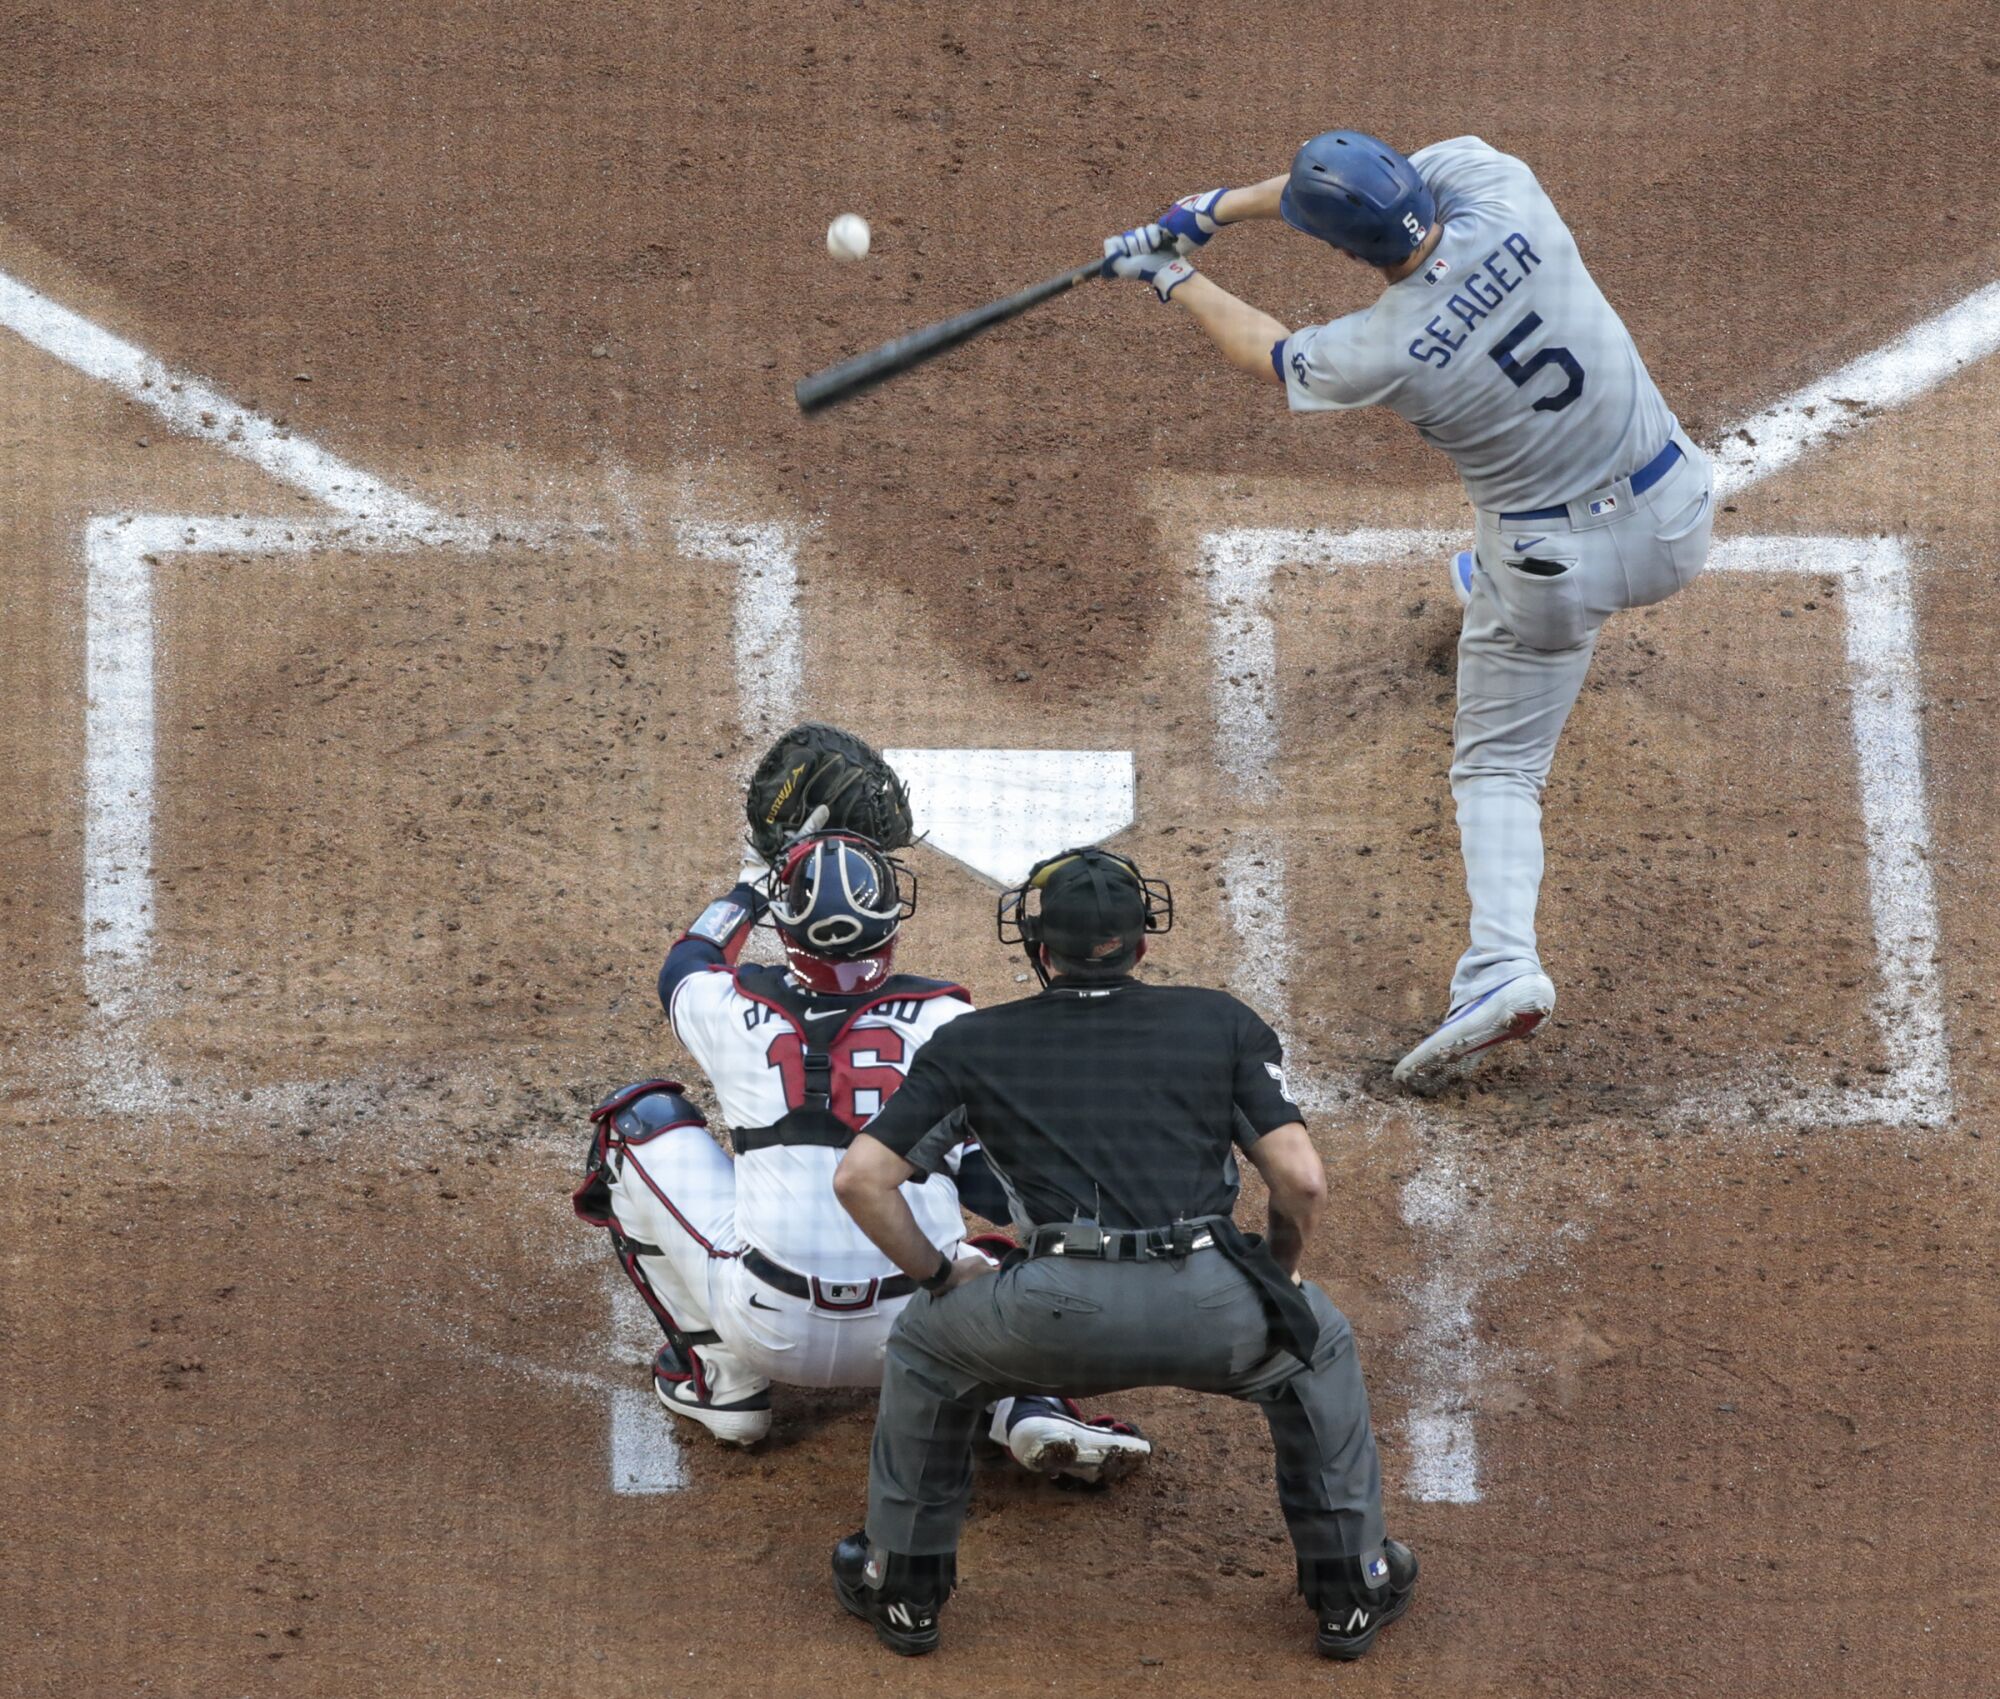 Dodgers shortstop Corey Seager hits an RBI single during the first inning of Game 3.